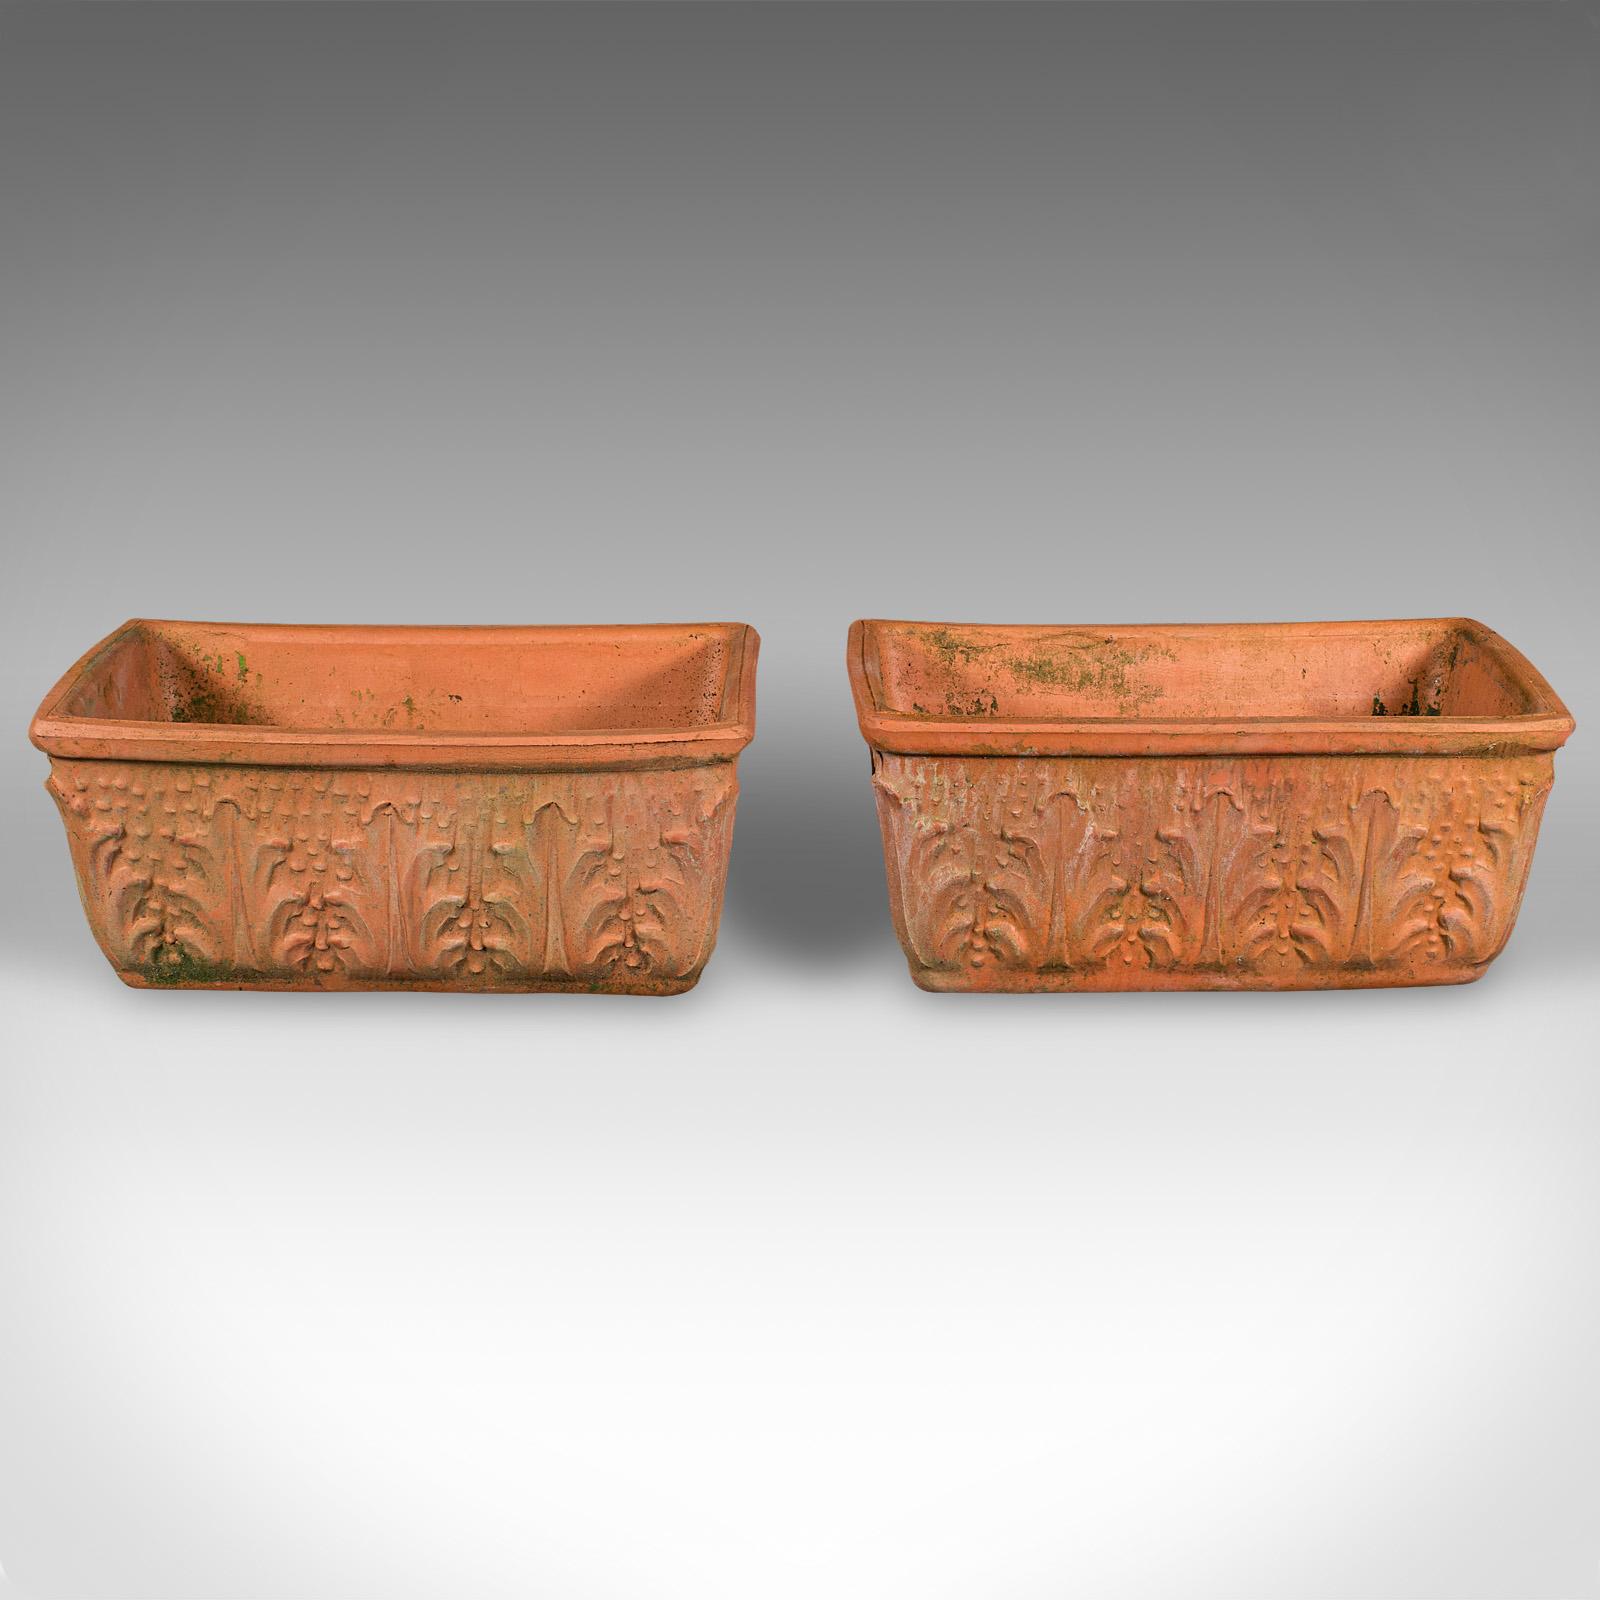 This is a pair of vintage windowsill planters. An Italian, terracotta window box jardiniere, dating to the late 20th century, circa 1970.

Charmingly petite duo, ideal for a chic apartment or townhouse
Displaying a desirable aged patina with a